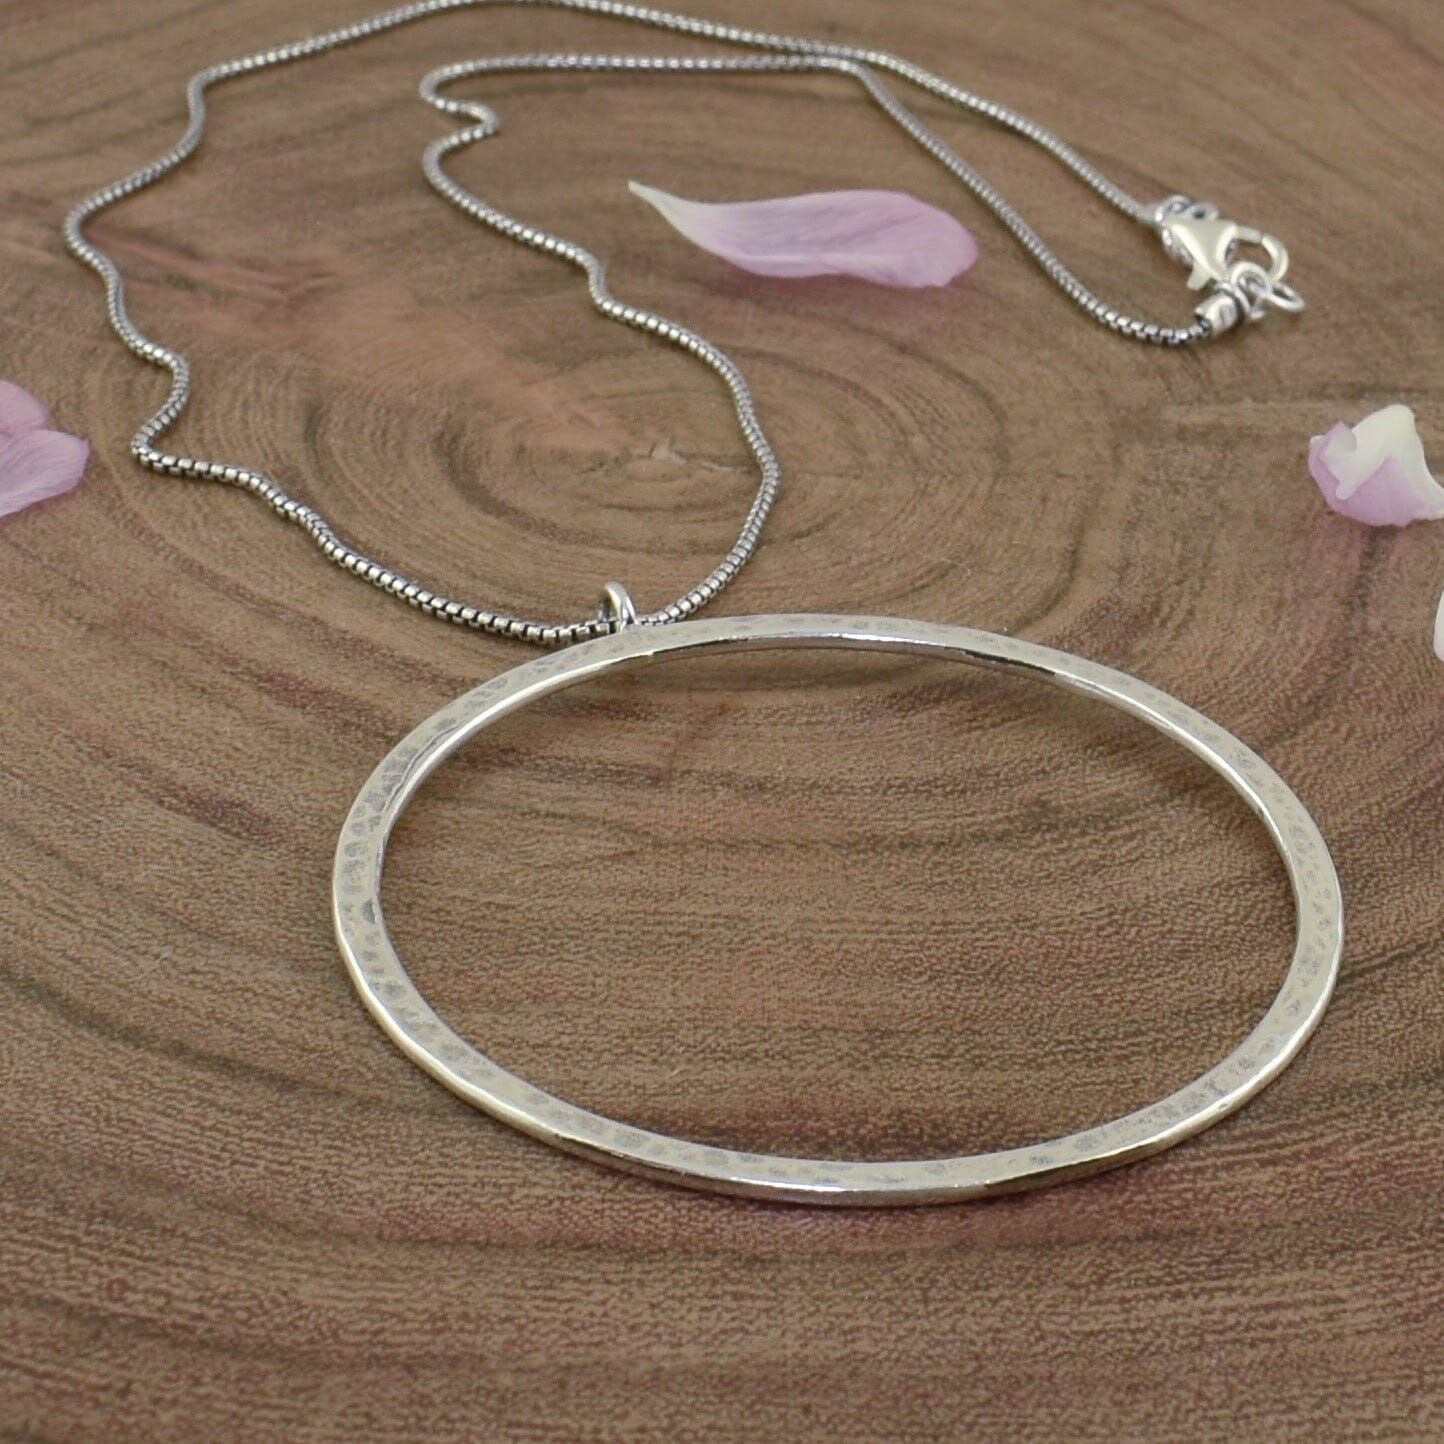 .925 sterling silver necklace featuring a large round pendant